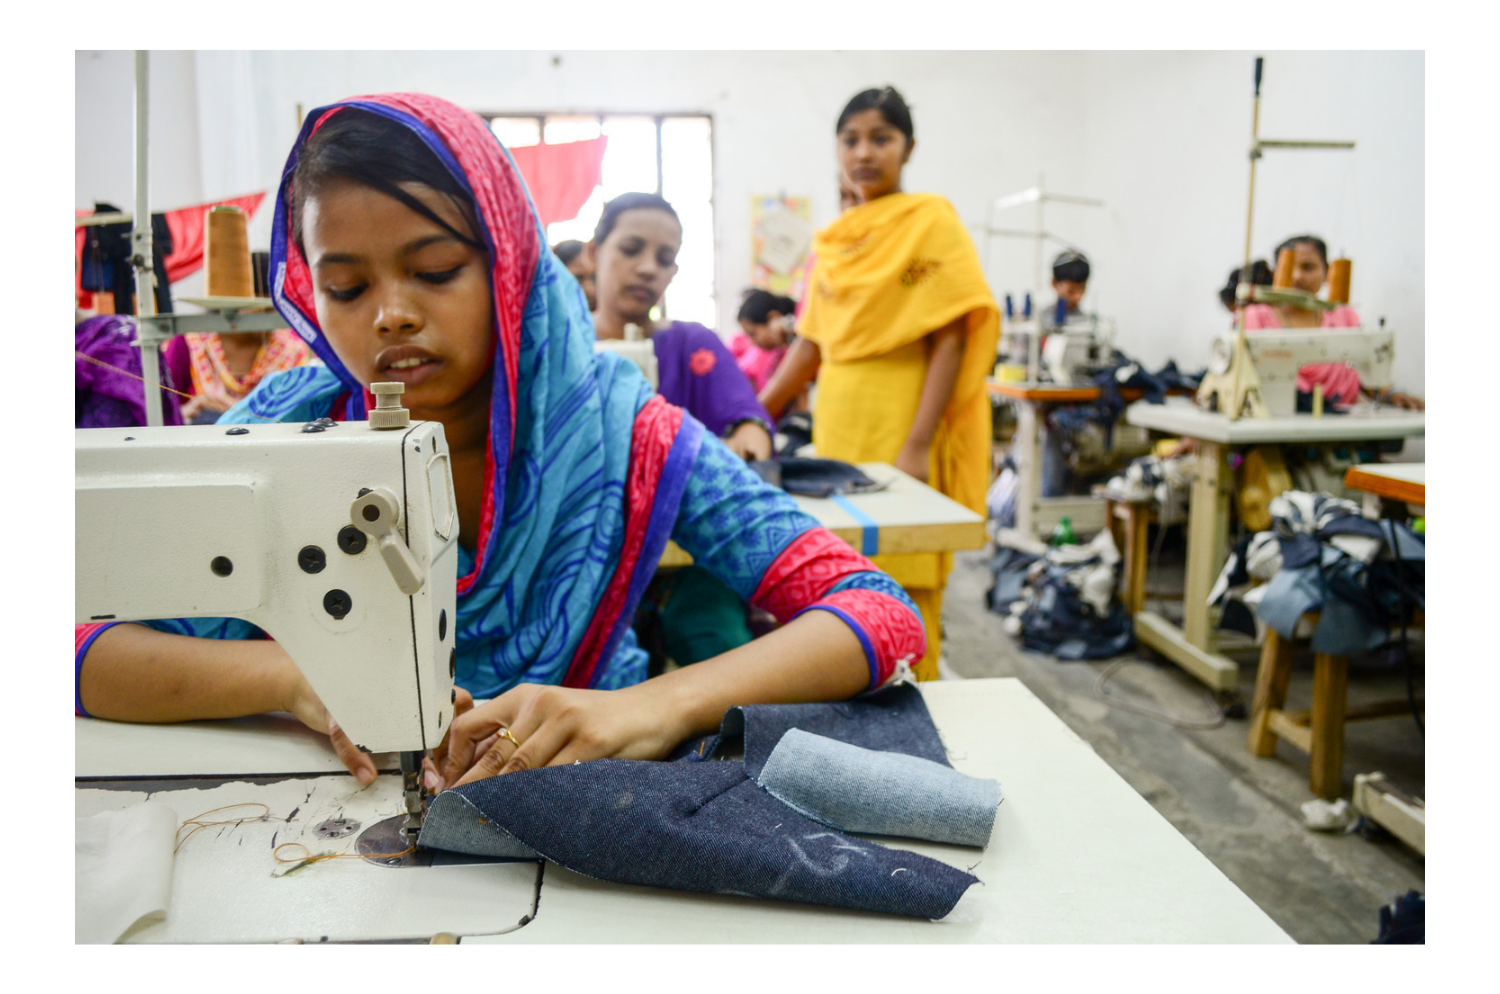 Bithi, 15, was forced to work in a garment factory. Next up for the girl — an arranged marriage. (©2016 World Vision/photo by Mark Nonkes. Courtesy WorldVision.Org)